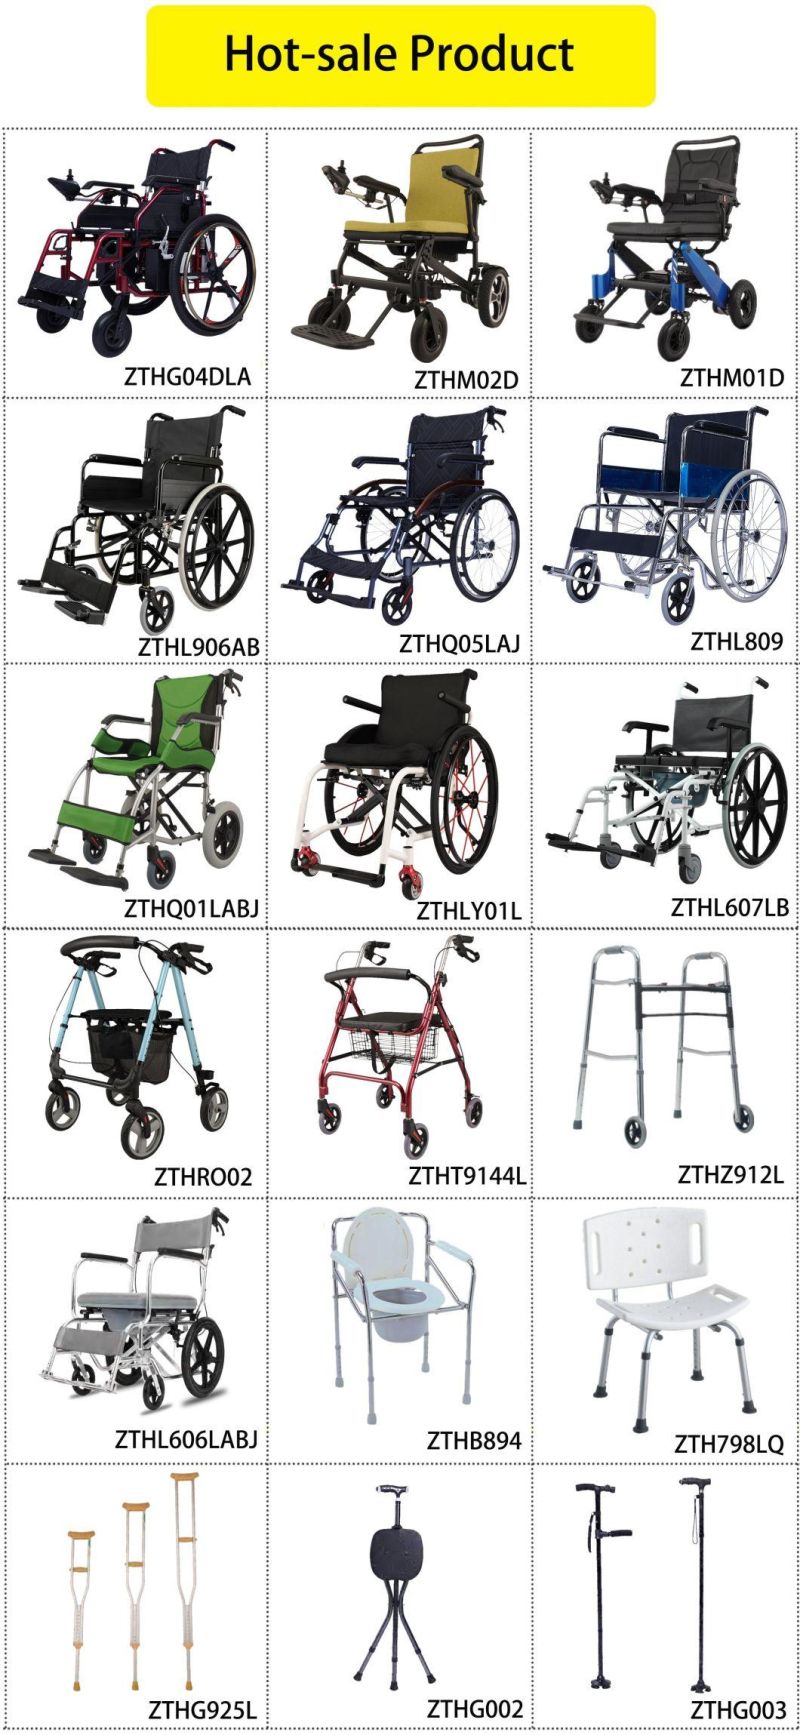 Bath Toilet Chair Non-Slip Home Pregnant Women Bathroom Disabled Mobile Easy Carry Lightweight Seat with Rehabilitation Medical Equipment for Elderly People